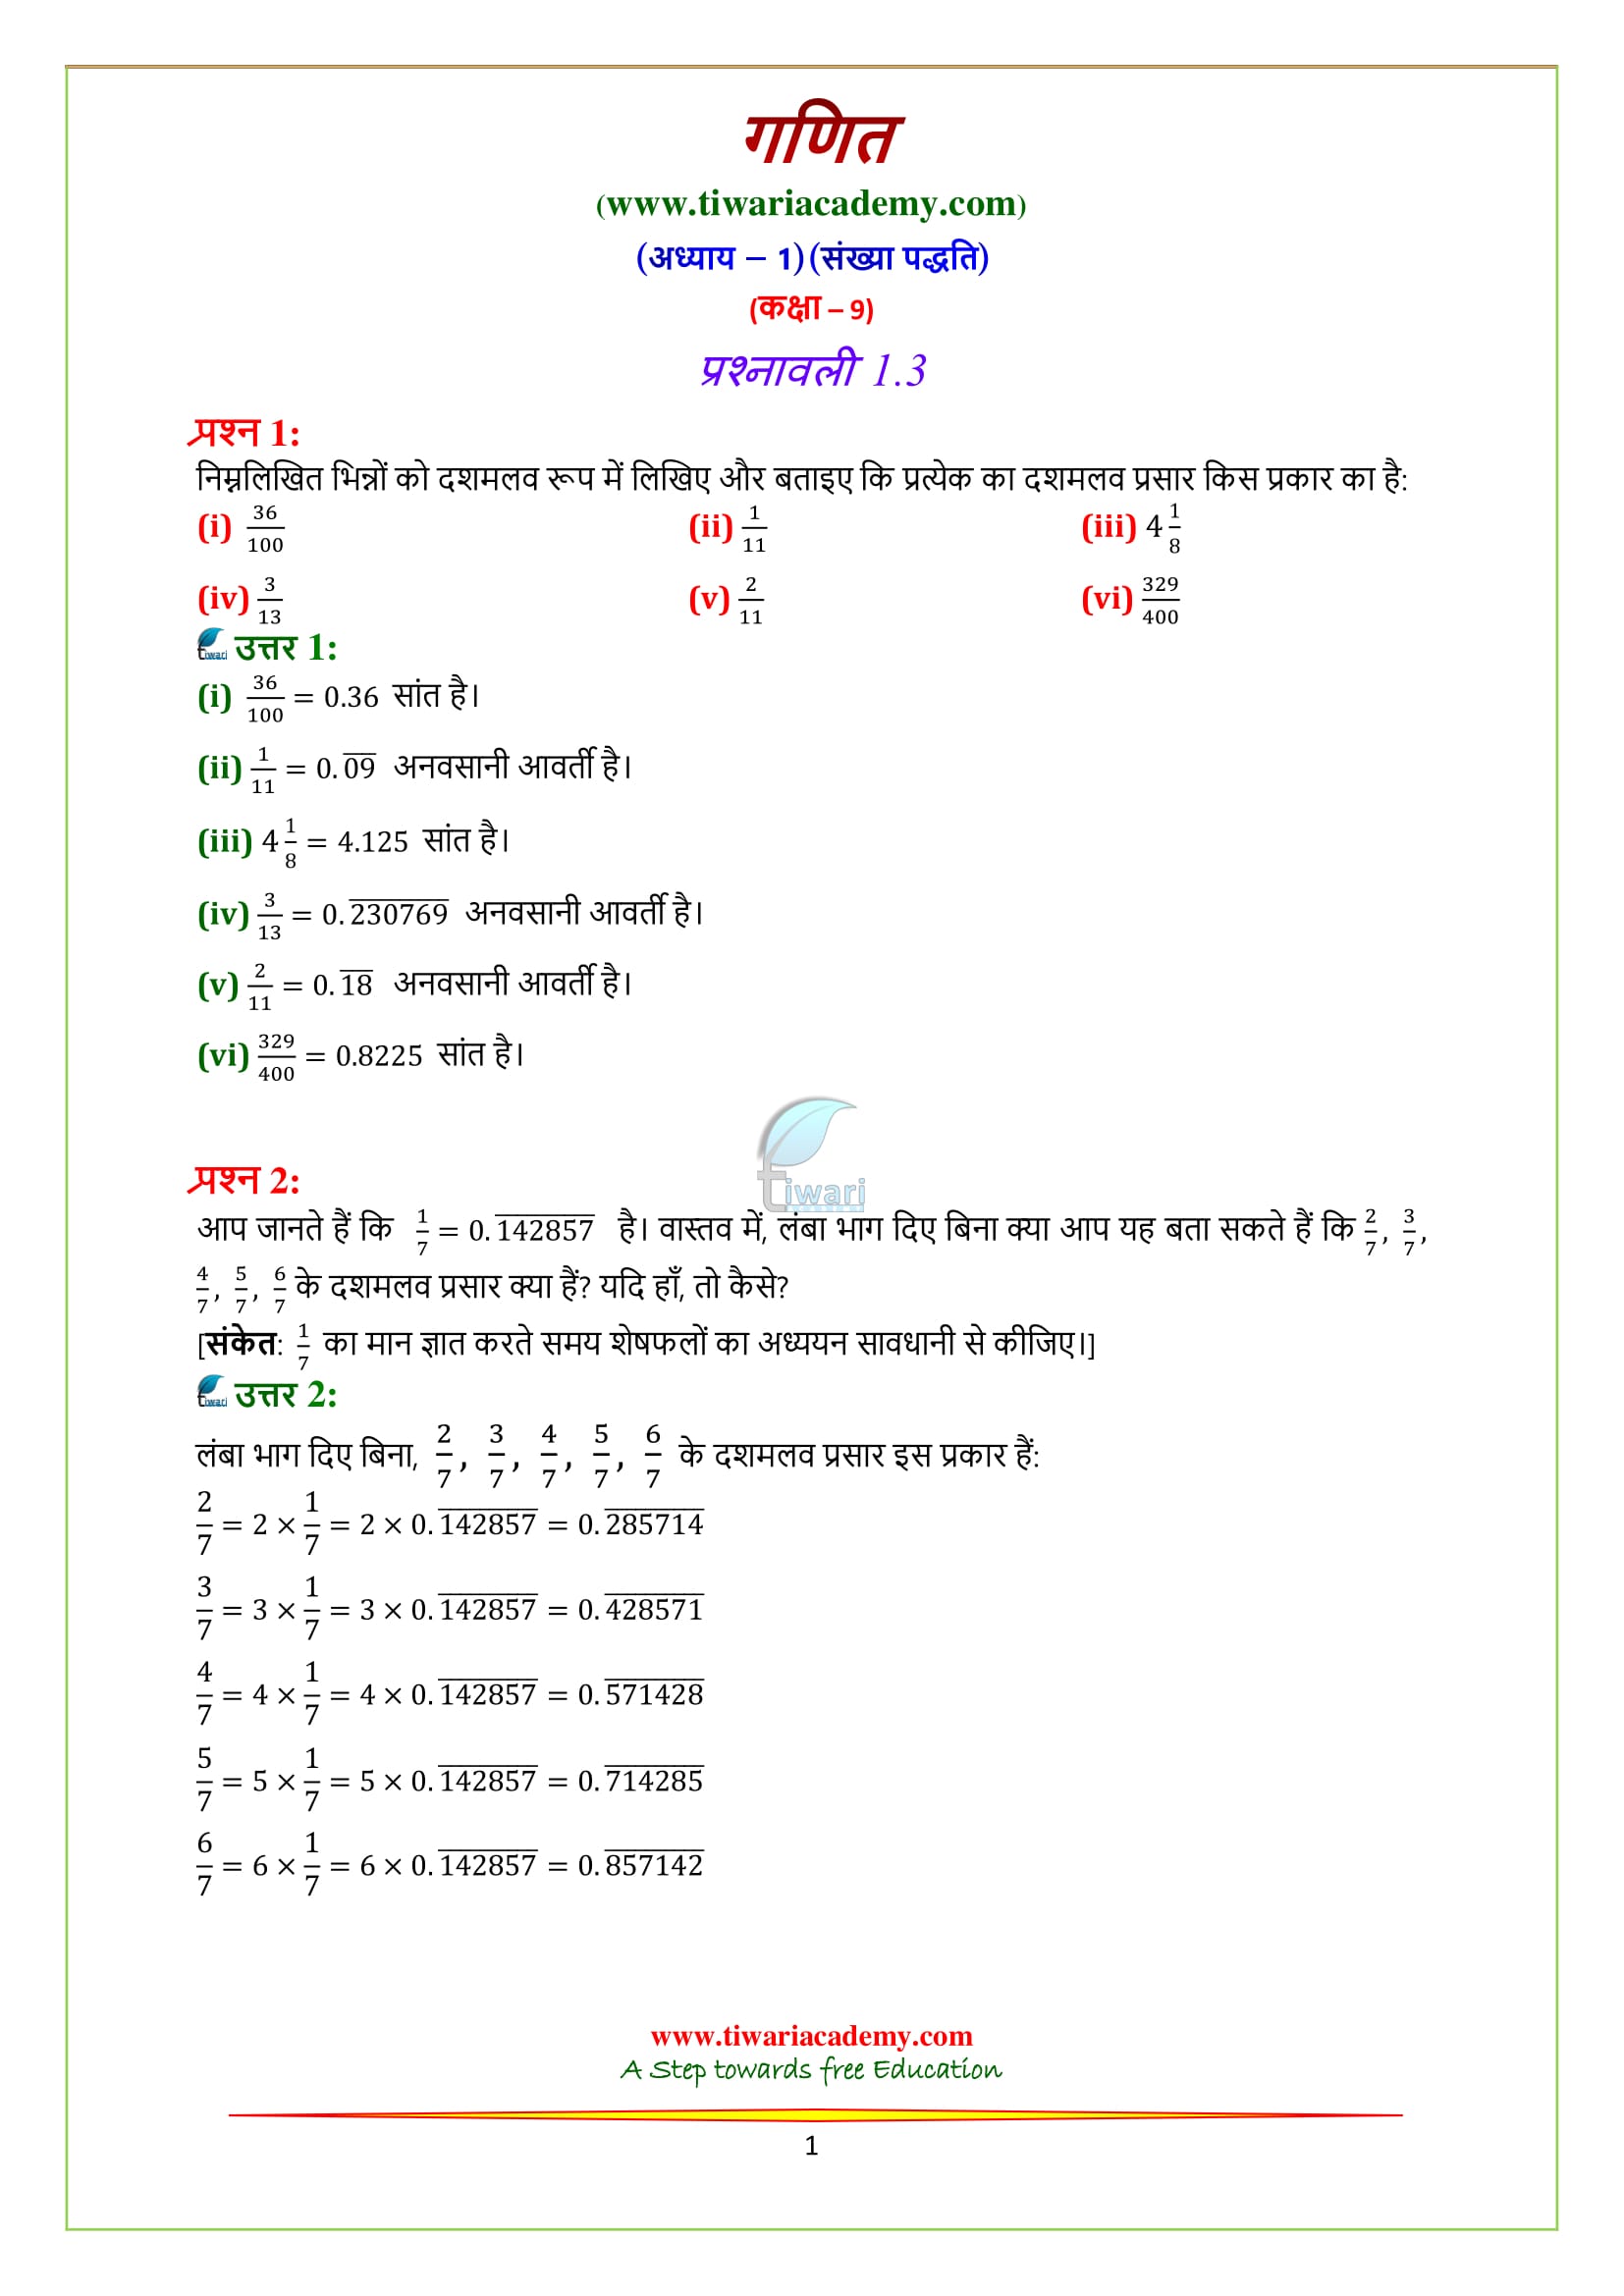 NCERT Solutions for Class 9 Chapter 1 Exercise 1.3 in Hindi